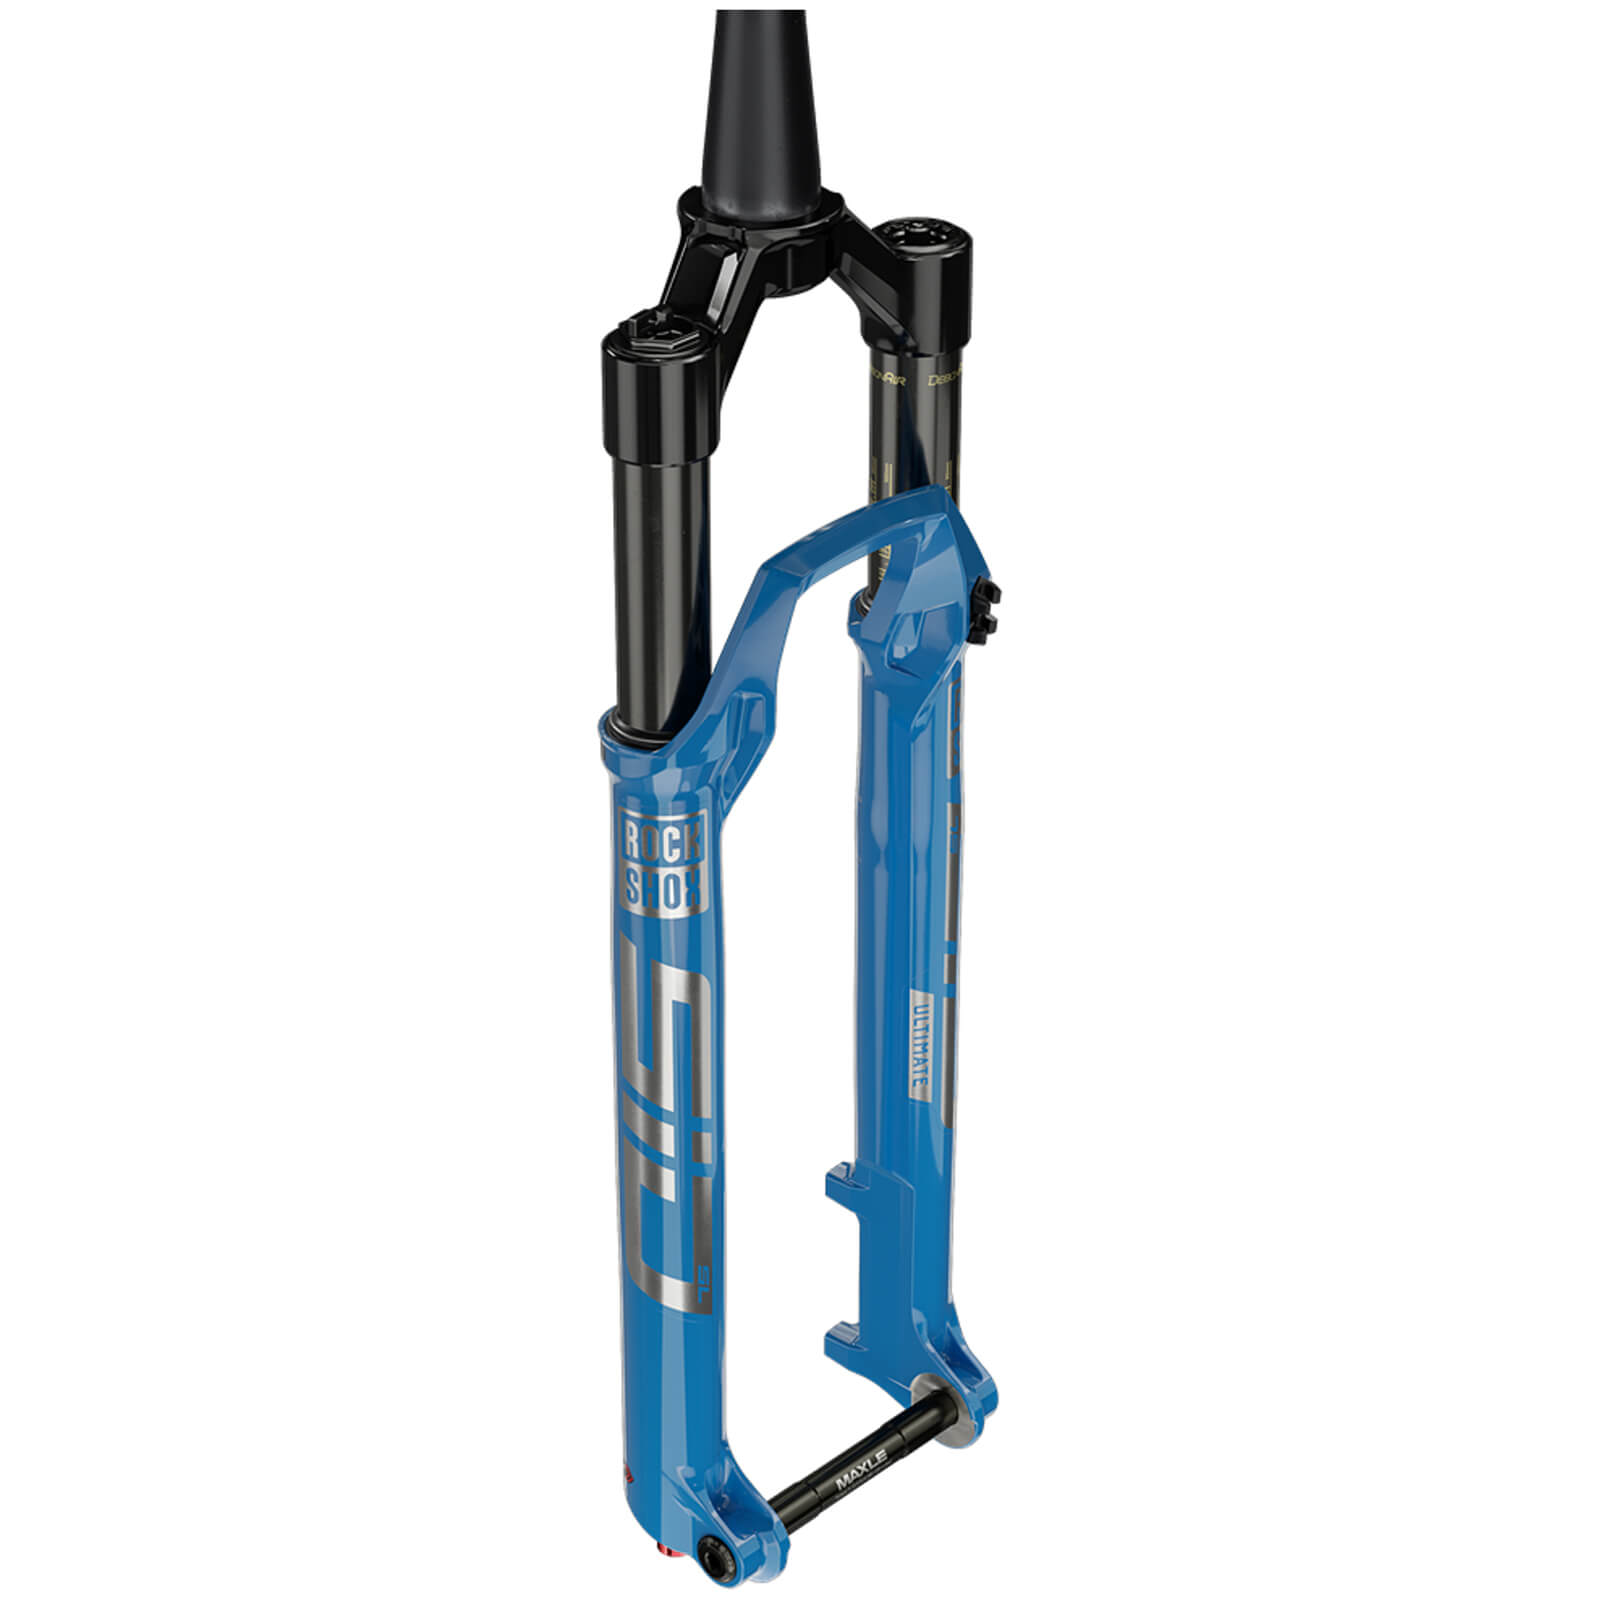 RockShox Sid SL Ultimate Race Day MTB Suspension Forks - 29 Inch - 44mm Offset - 15x110mm Axle - Crown Lock Out - Gloss Blue